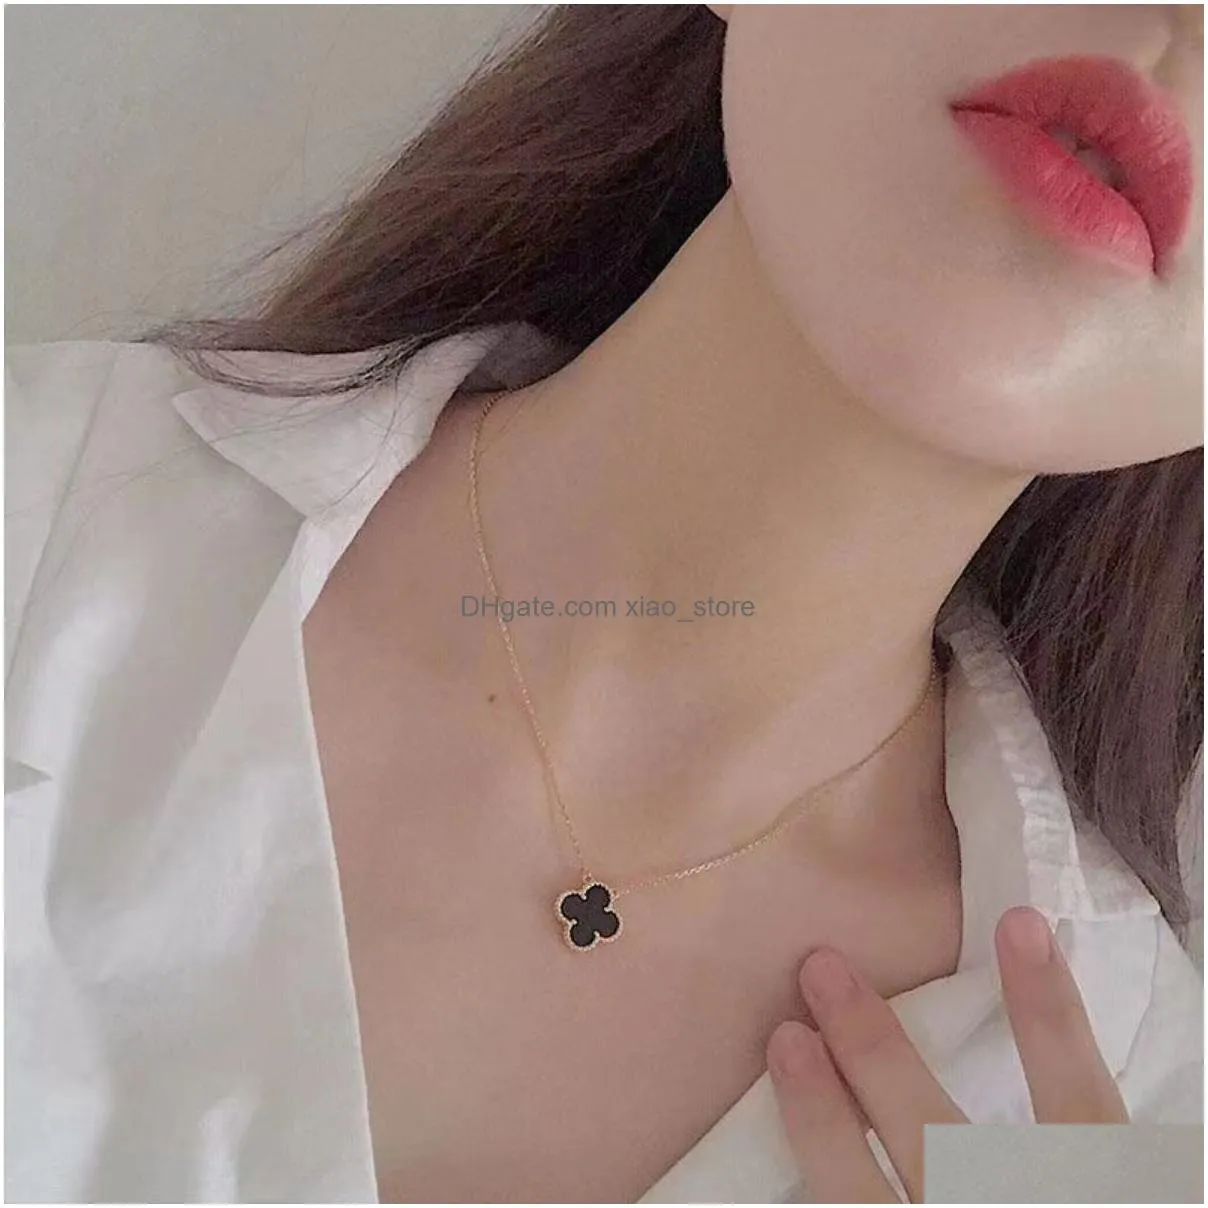 necklaces 2023 van clover necklace fashion flowers fourleaf clover cleef womens luxury designer necklaces jewelry 01